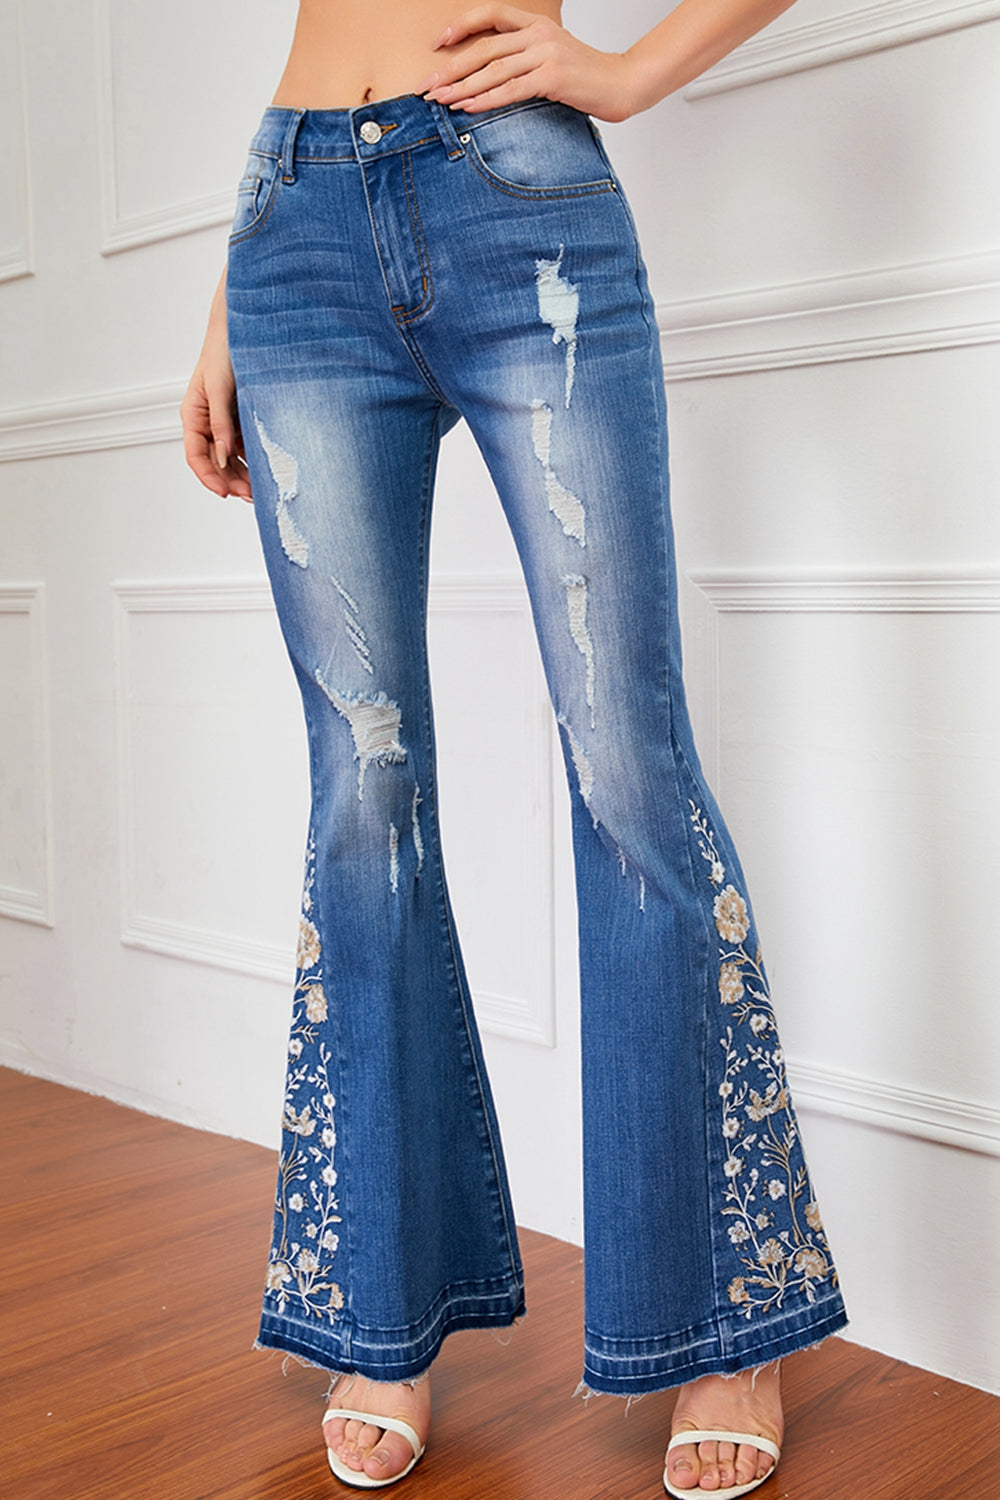 Flower Embroidery Distressed Jeans - Medium / S - Bottoms - Pants - 1 - 2024